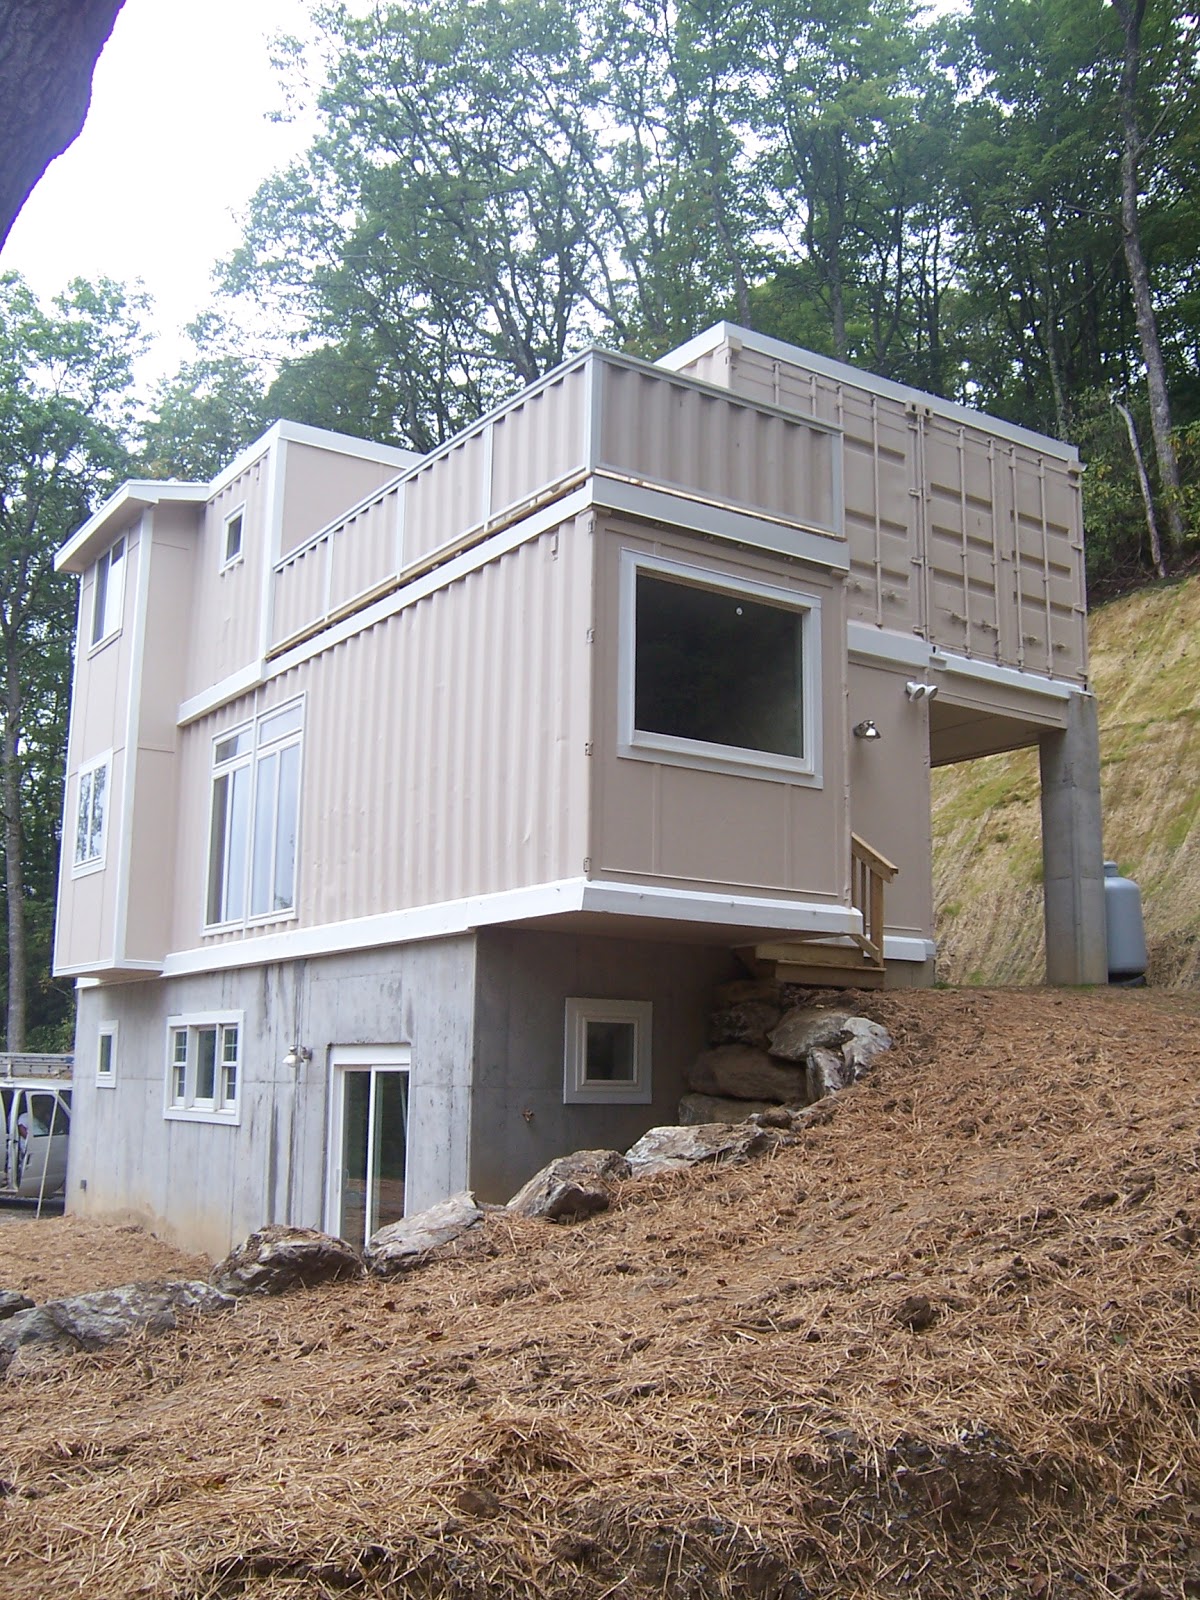 Shipping Container Homes: High Country Green Boxes ...